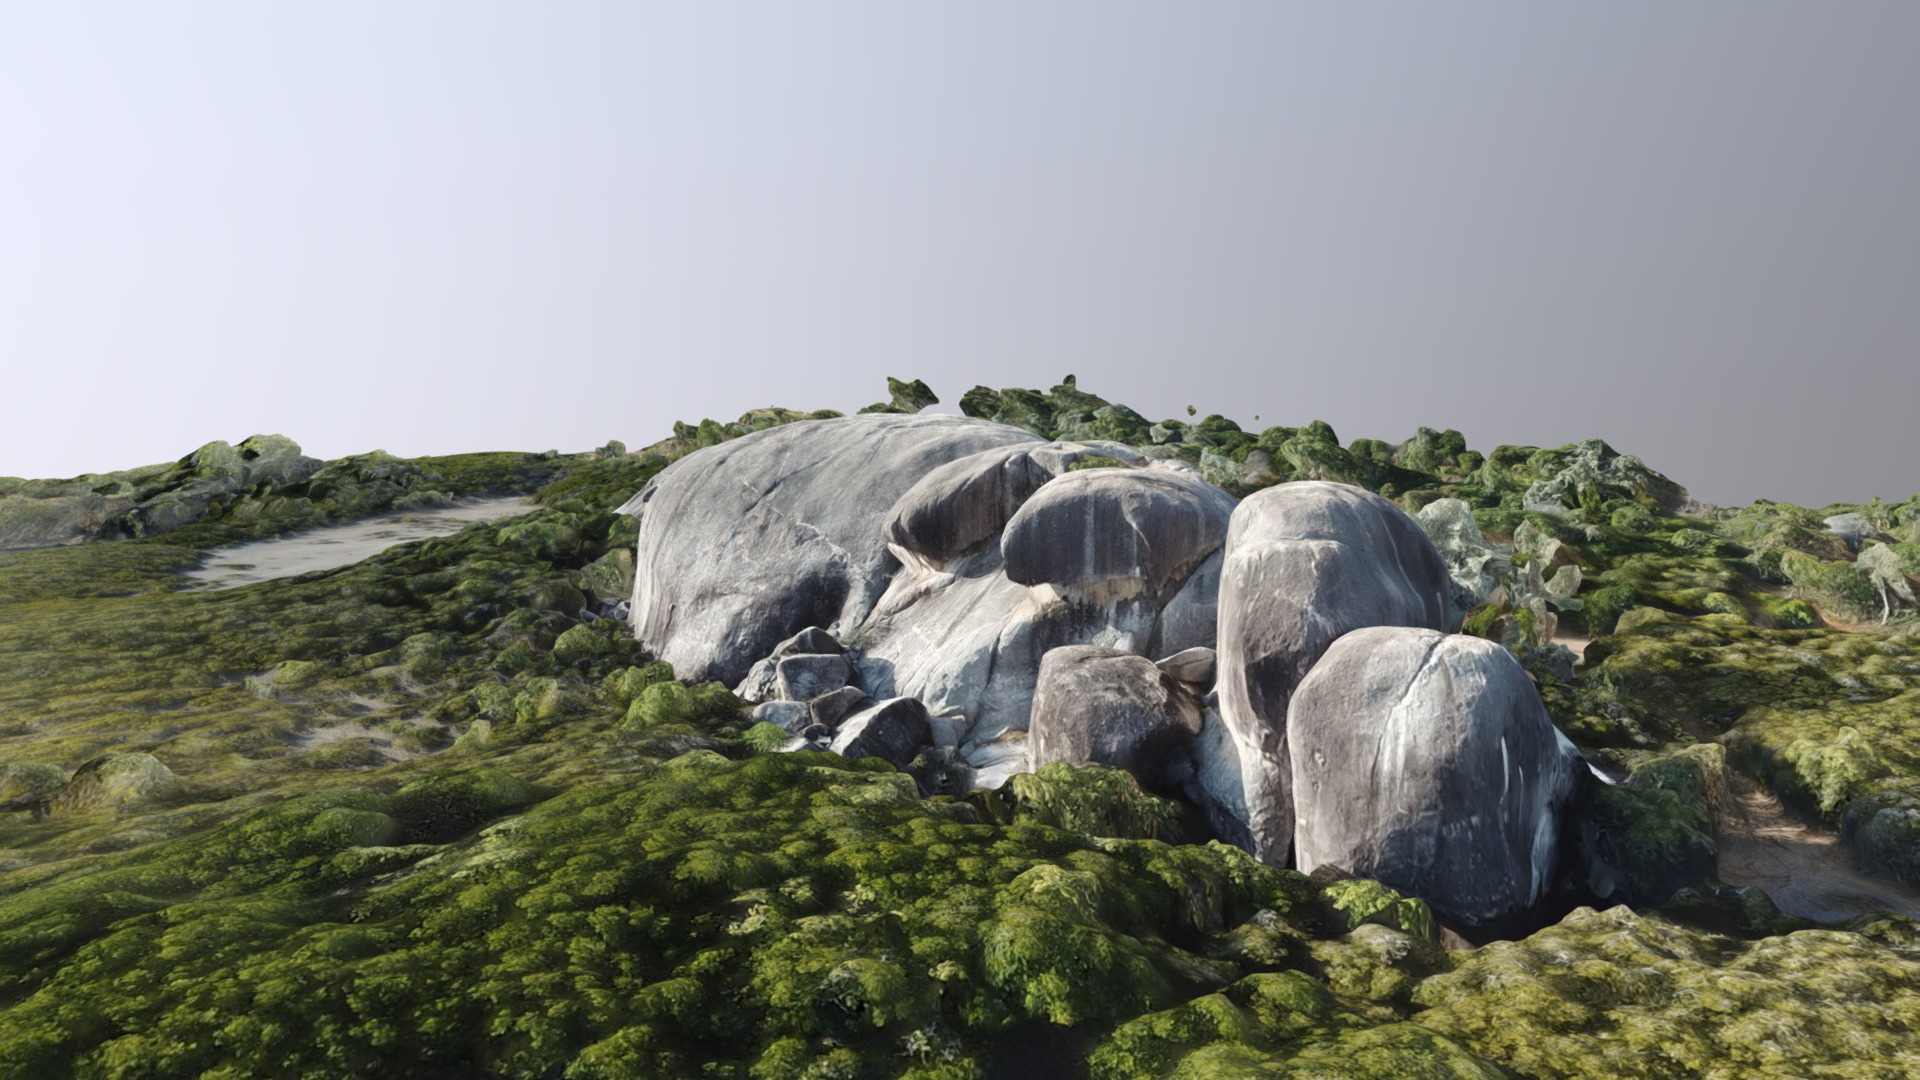 3D model Bald Rock on Cape Cleveland - This is a 3D model of the Bald Rock on Cape Cleveland. The 3D model is about a group of large rocks on a hill.